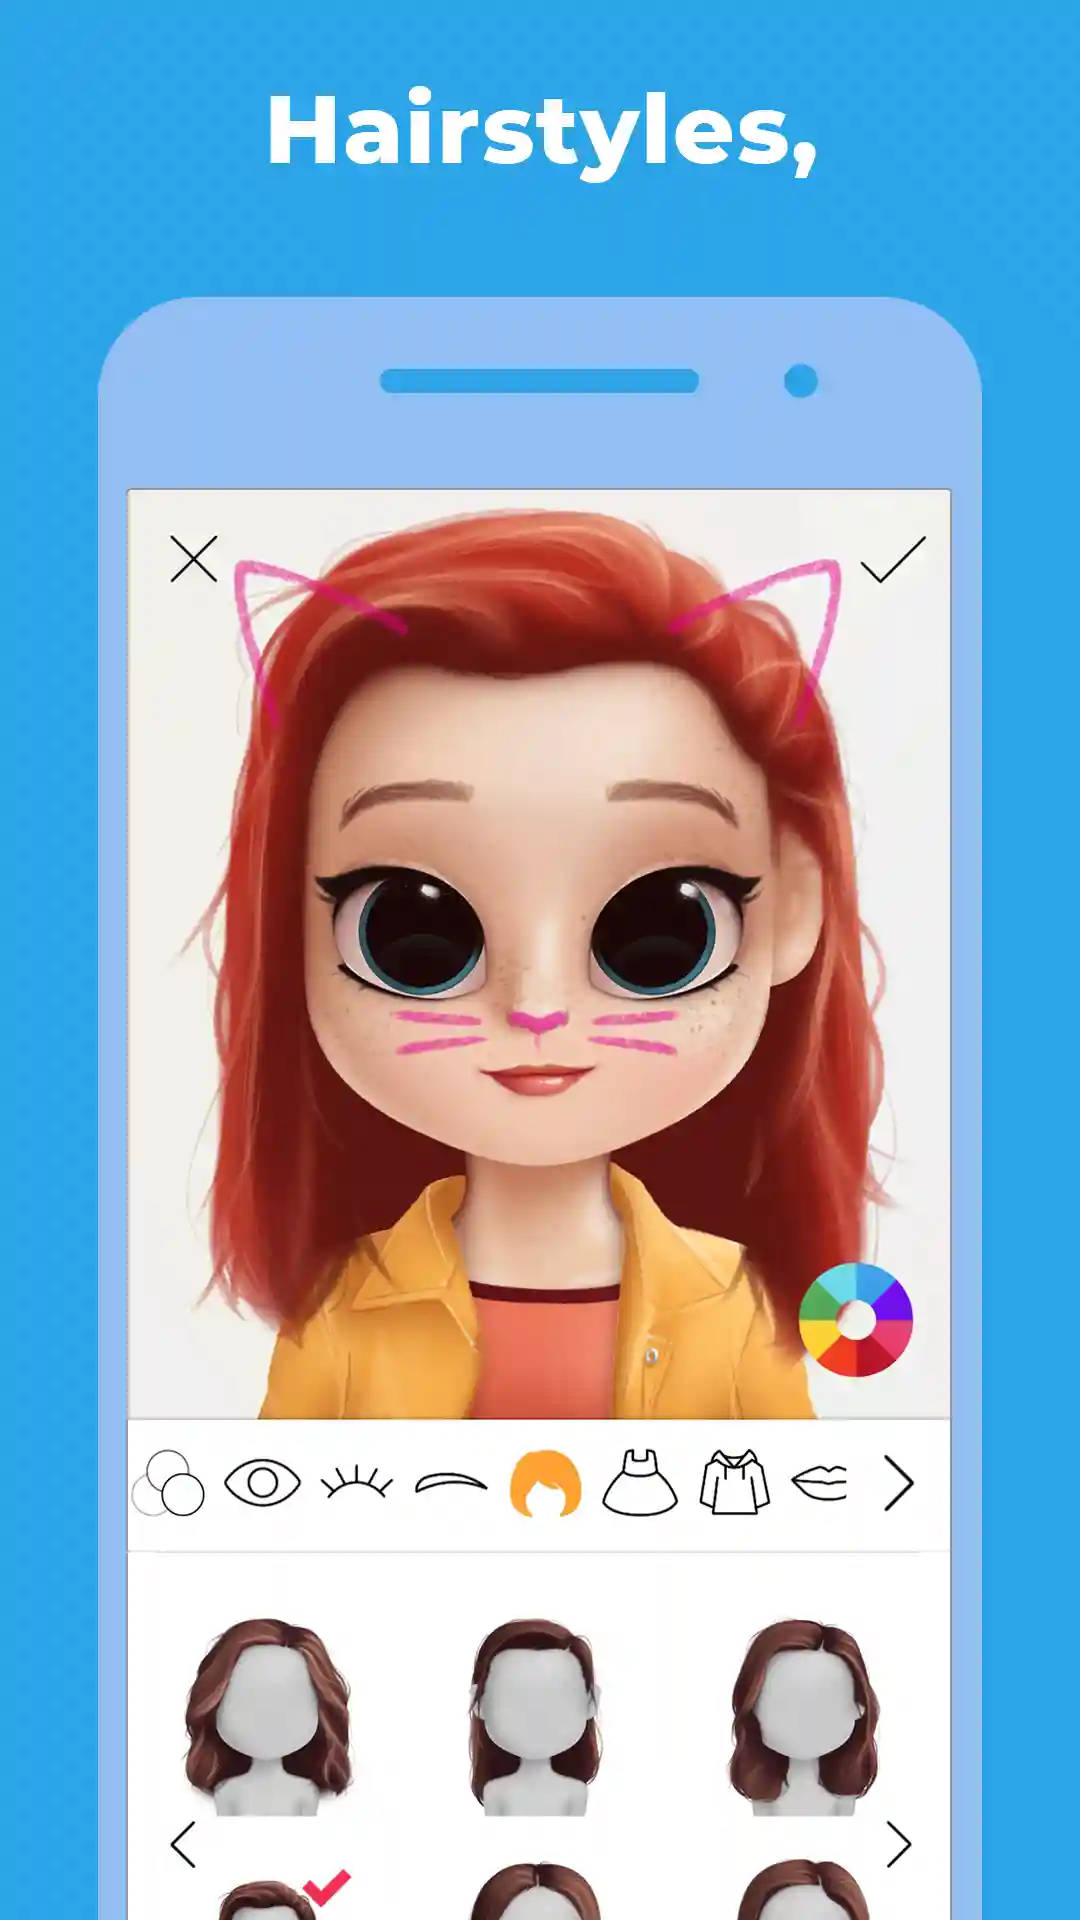 Download Dollify Hairstyles Wallpaper | Wallpapers.com